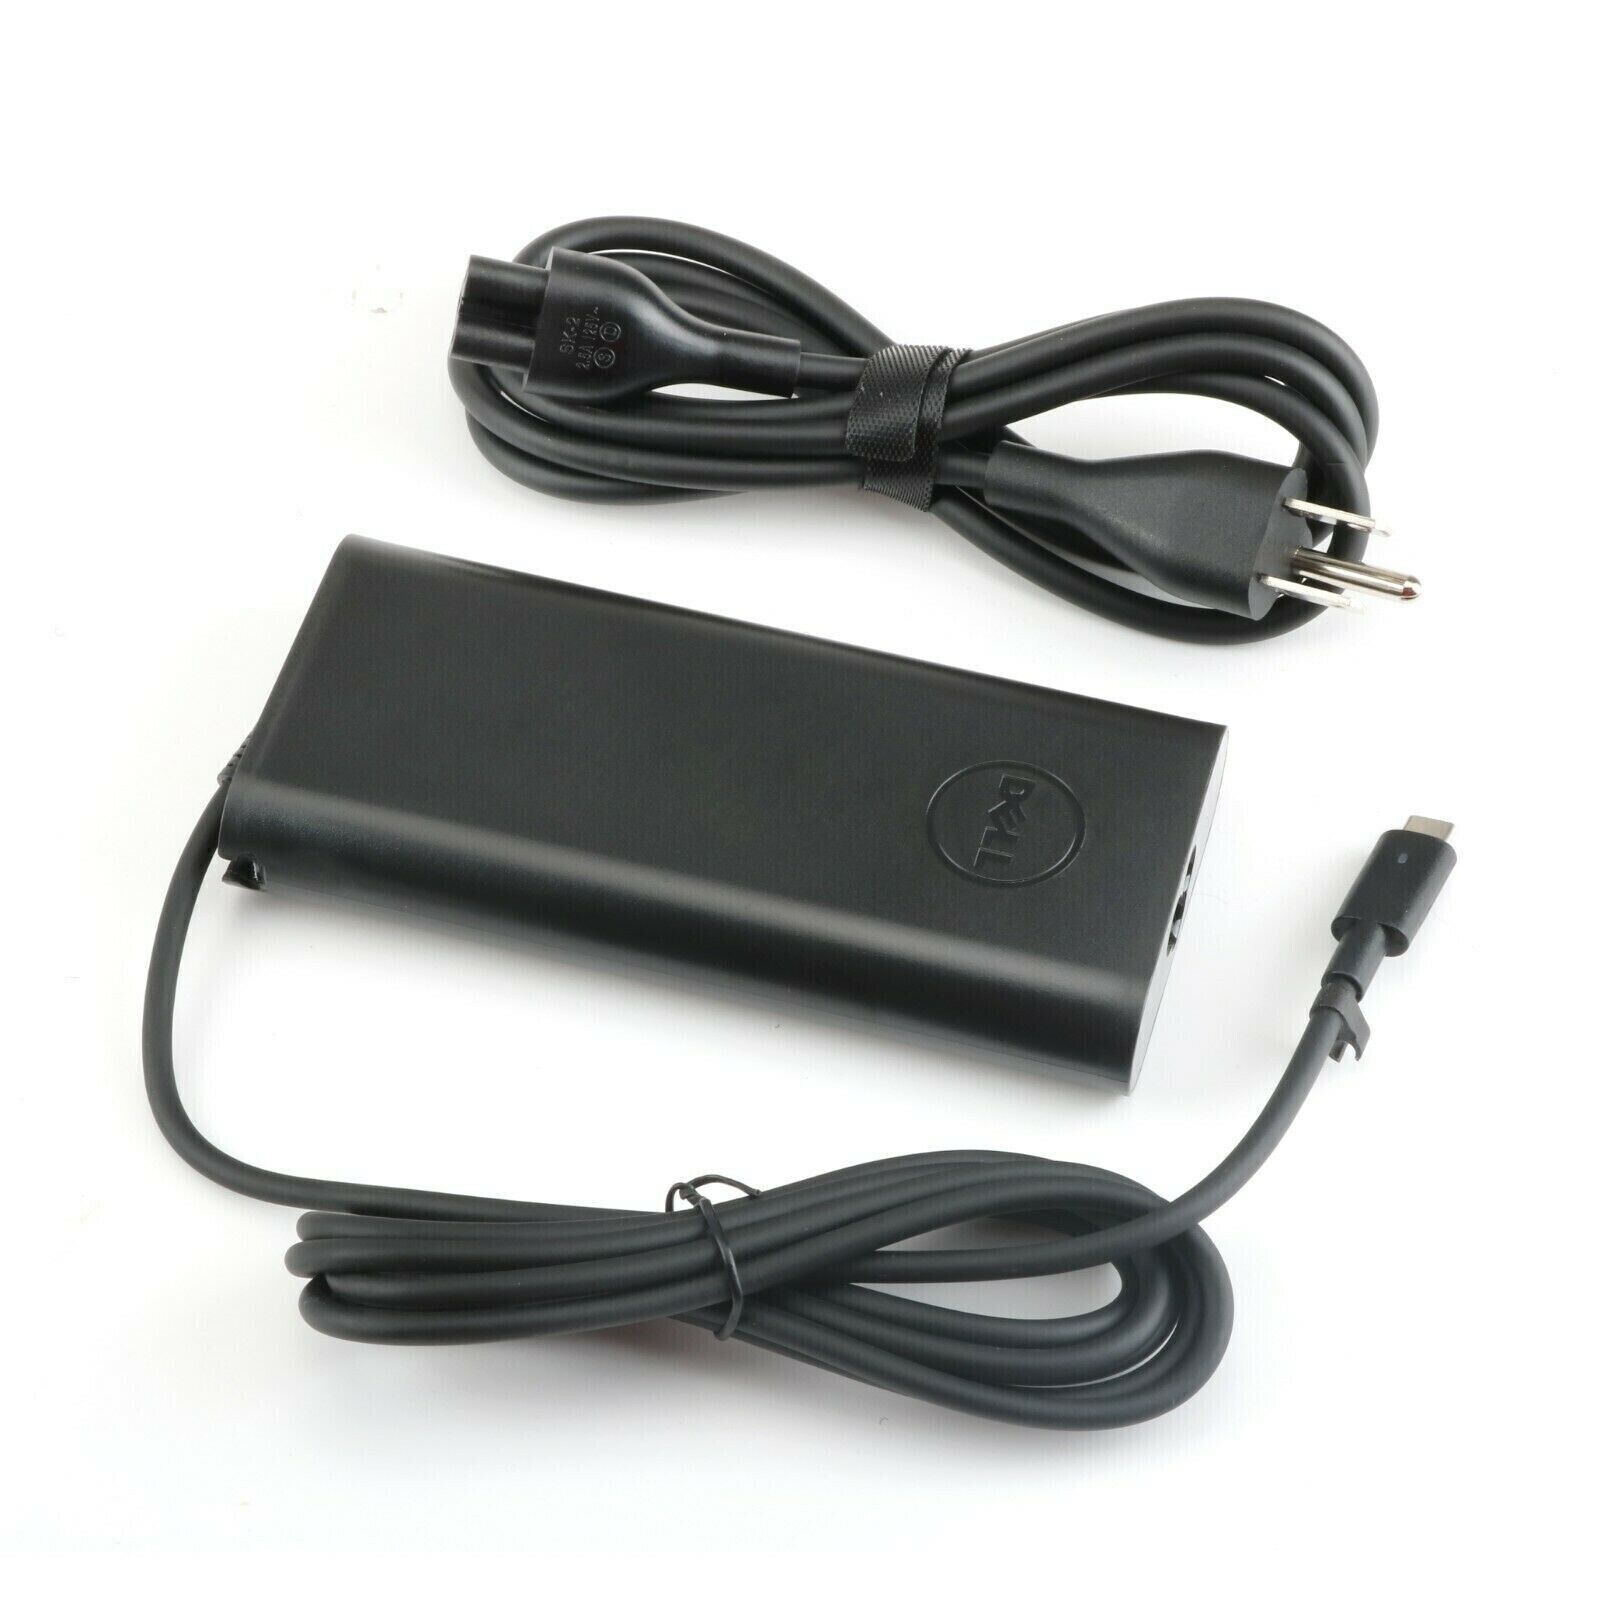 NEW OEM 130W USB-C Charger For Dell Latitude 7410 XPS 15 9500 Precision 5530